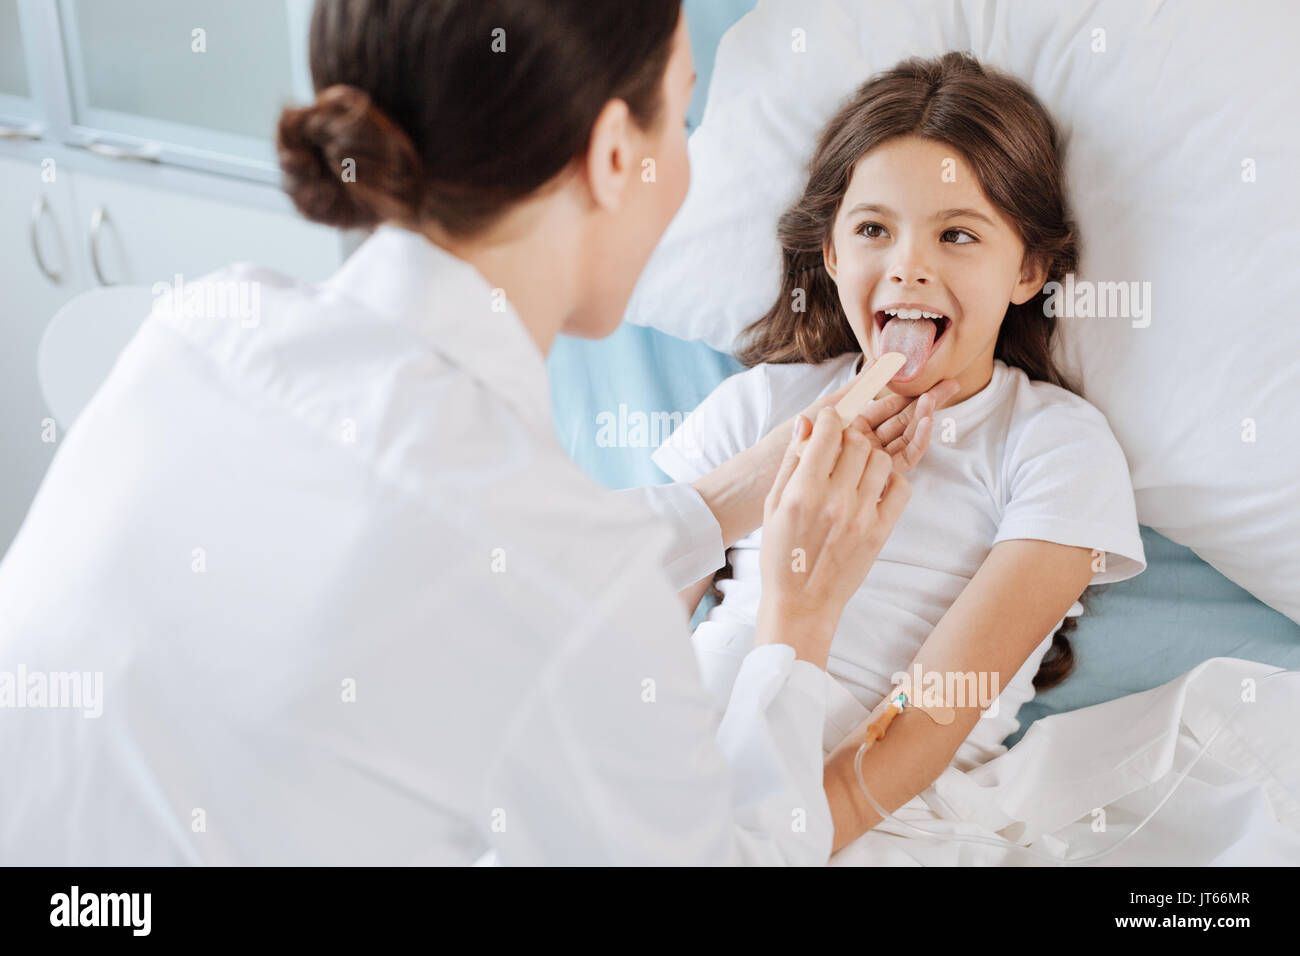 Pleasant cheerful girl being examined by a doctor Stock Photo